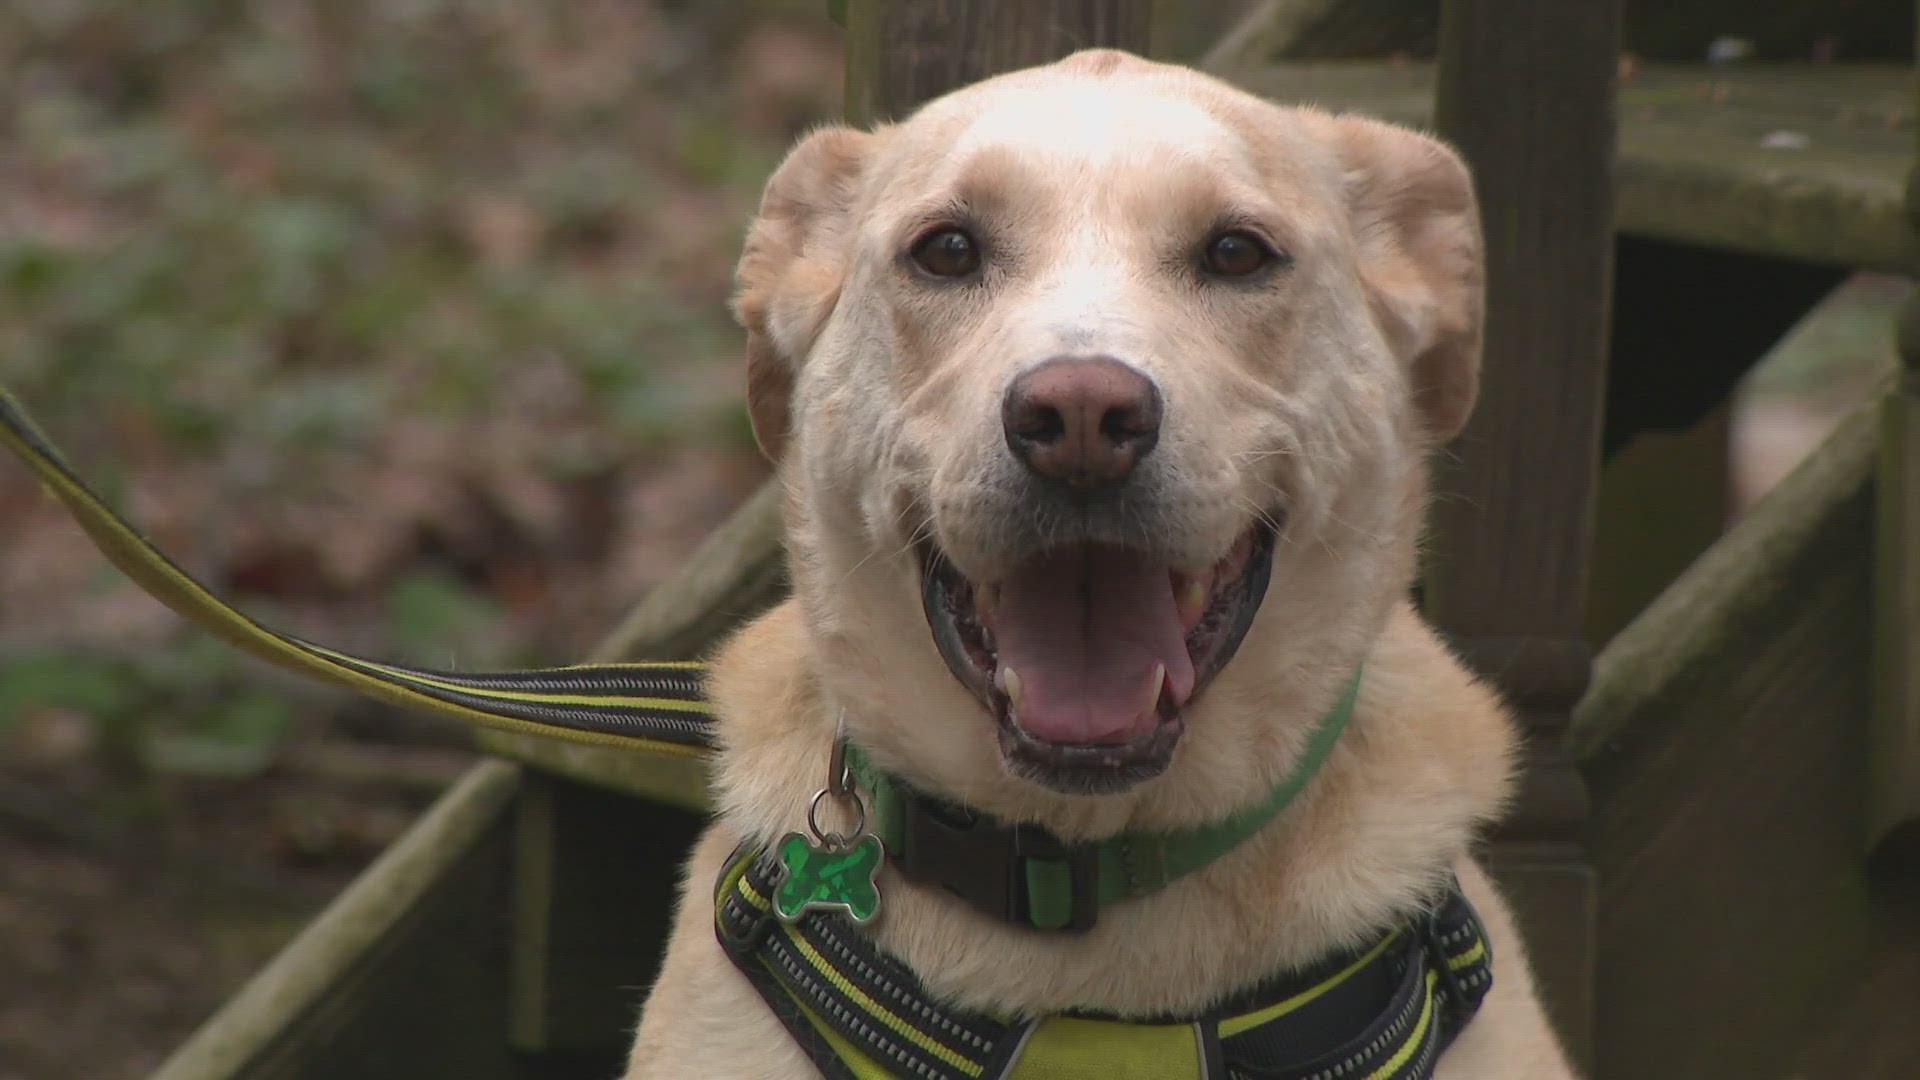 The BRAVE dog that saved a woman from a coyote in Montgomery County is OKAY and back home recovering.